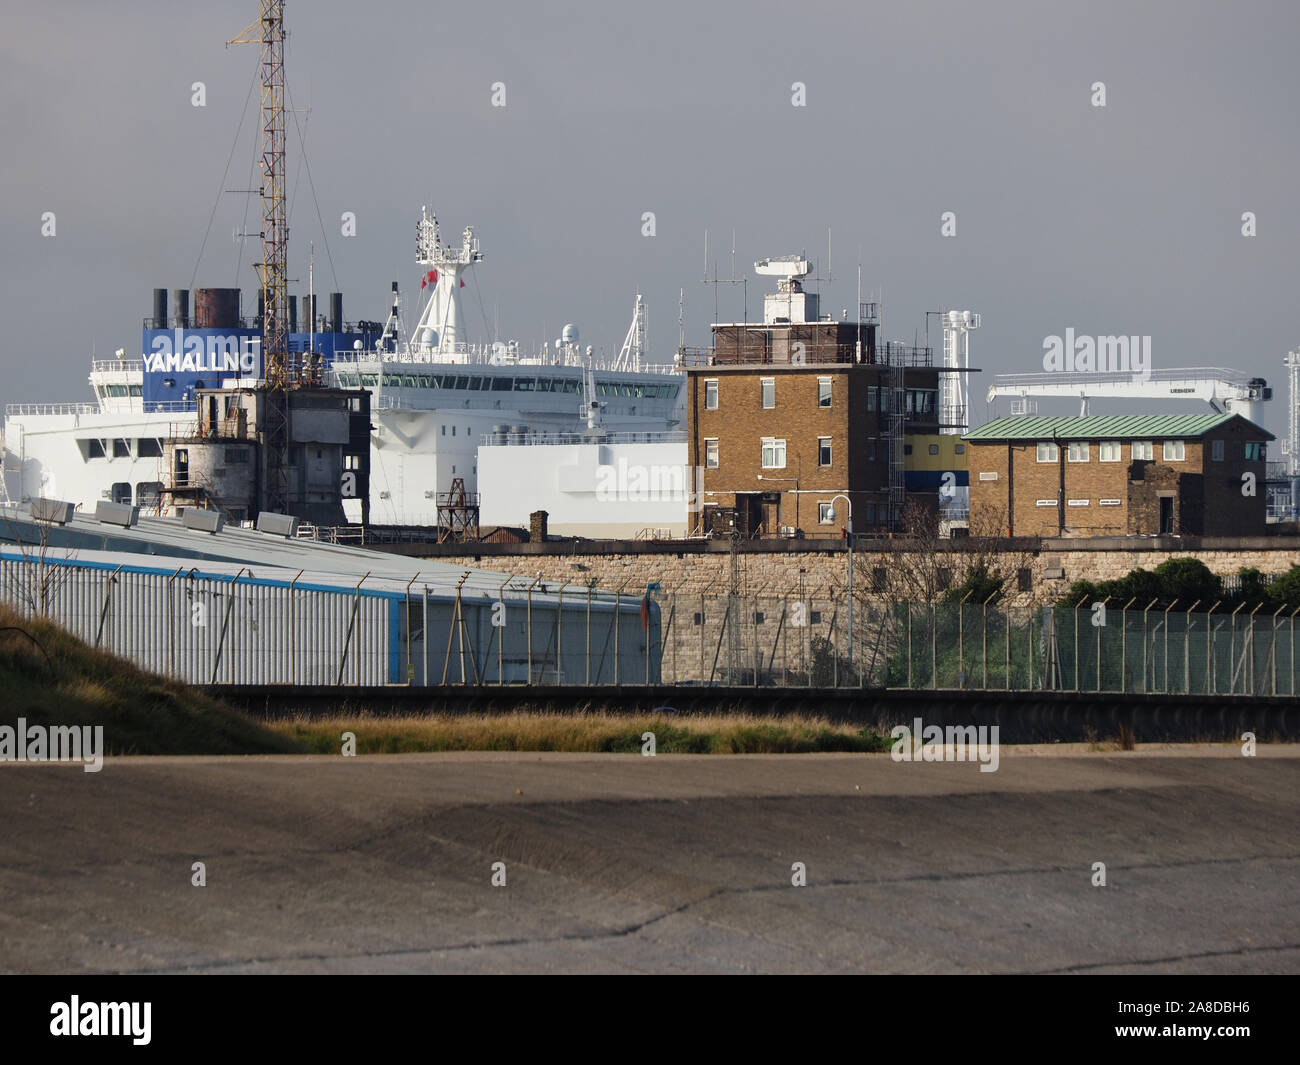 Sheerness, Kent, UK. 8th November, 2019. Russian LNG tanker 'Georgiy Brusilov' seen emerging from Sheerness docks just after leaving the National Grid's Grain LNG terminal. Grain LNG is of strategic national importance to UK energy infrastructure and is the largest LNG terminal in Europe. There has been a recent increase in visits by LNG ships as demand for gas increases as the weather turns colder. Credit: James Bell/Alamy Live News Stock Photo